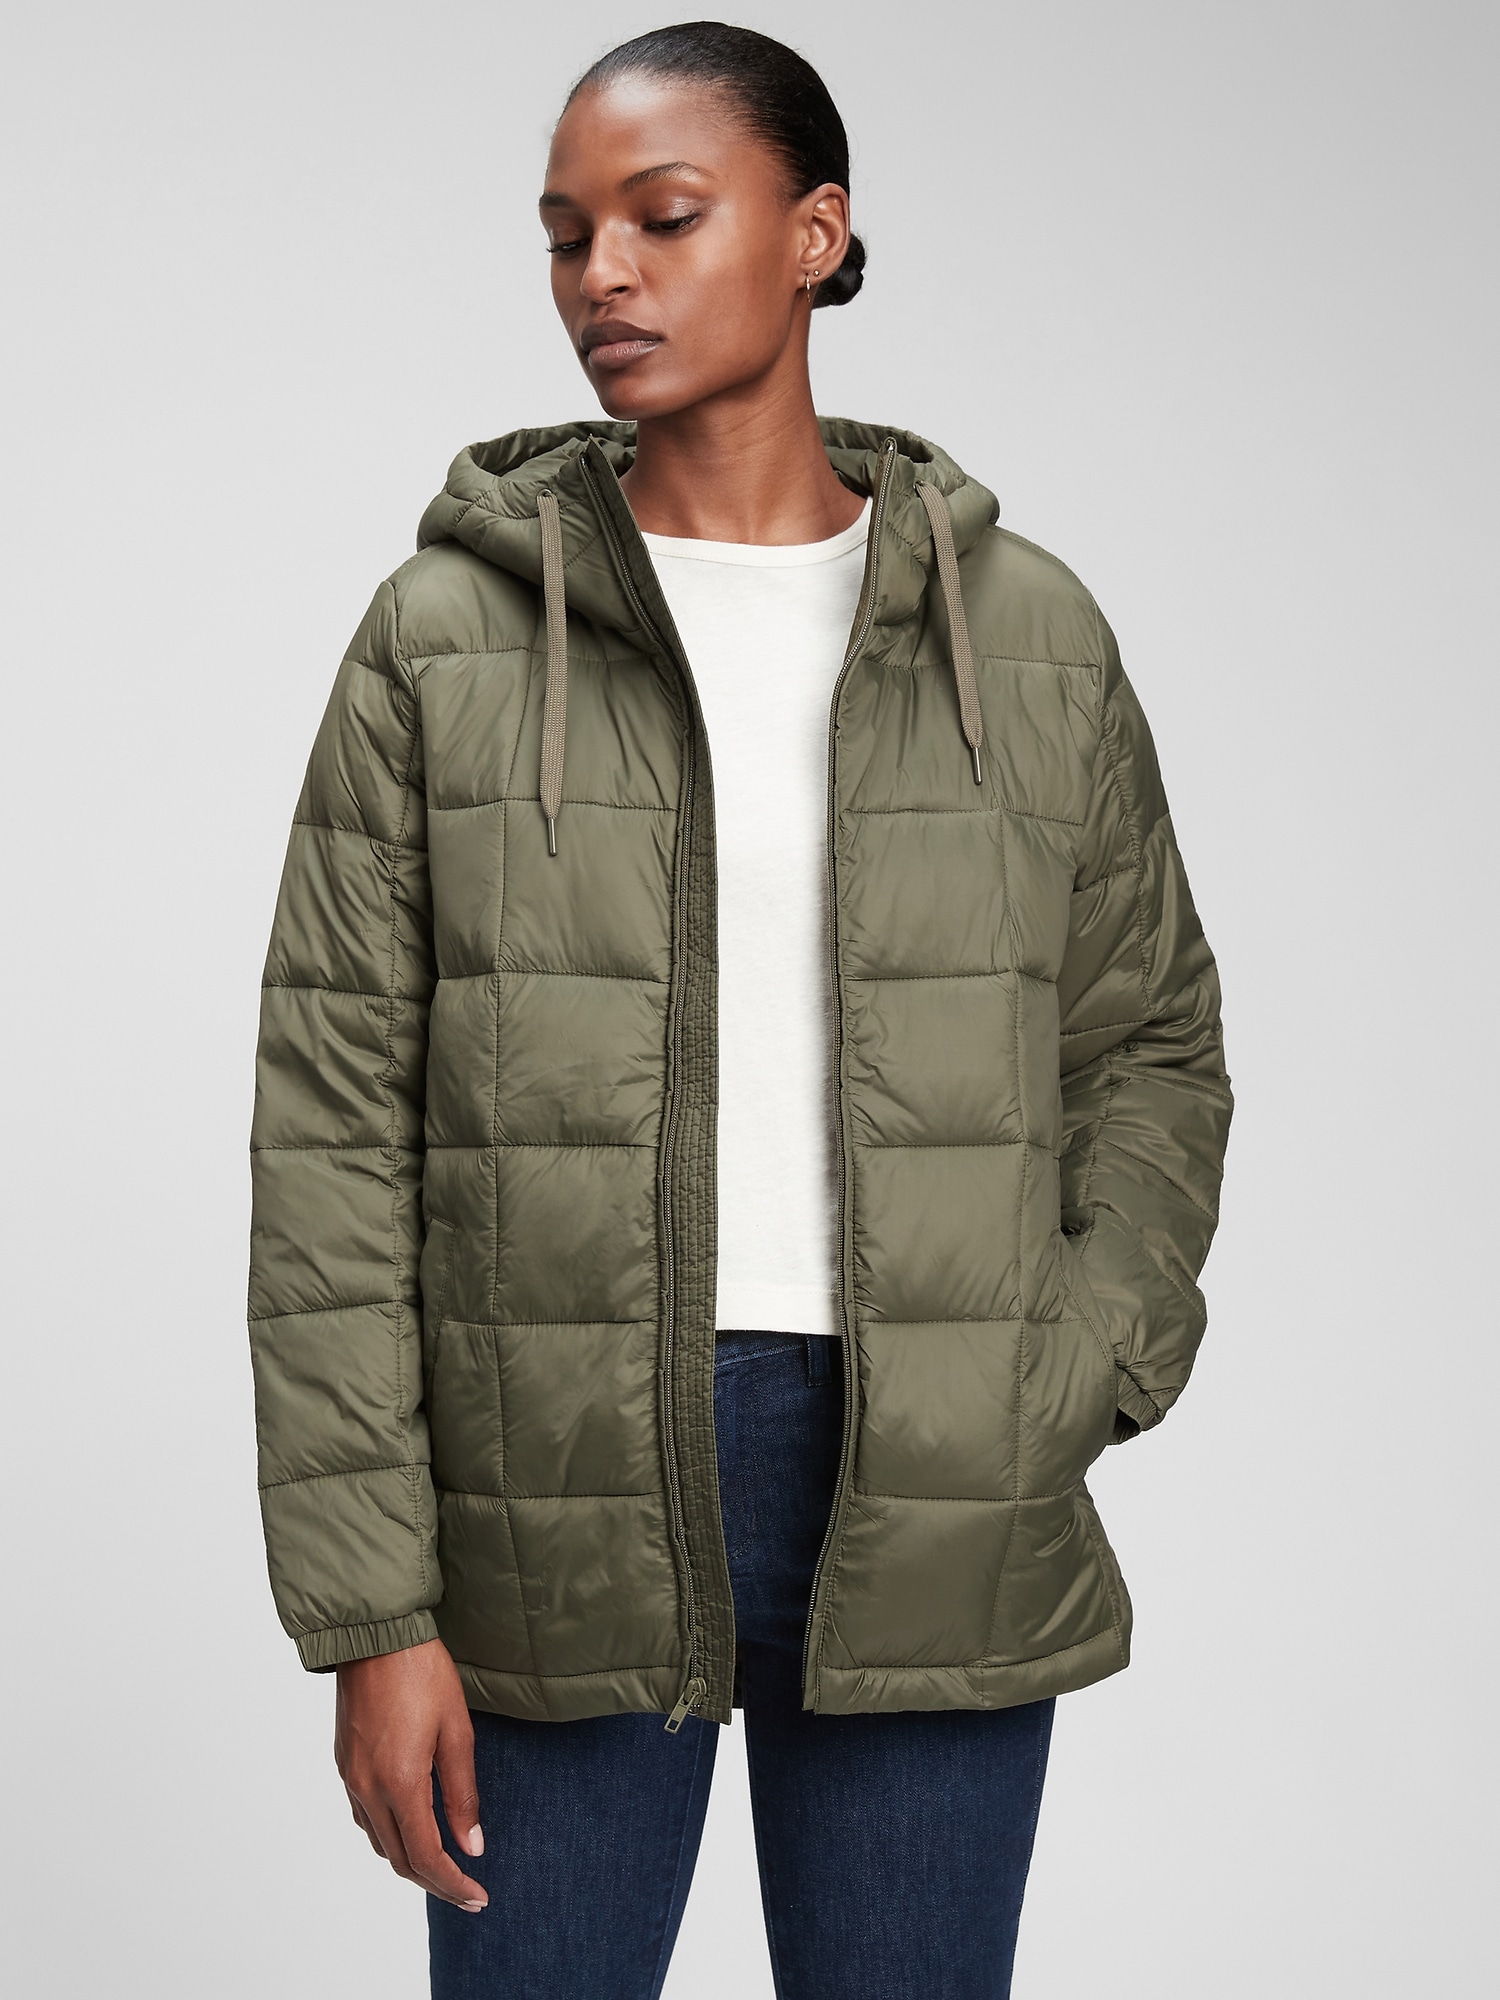 100% Recycled Nylon Relaxed Lightweight Puffer Jacket | Gap